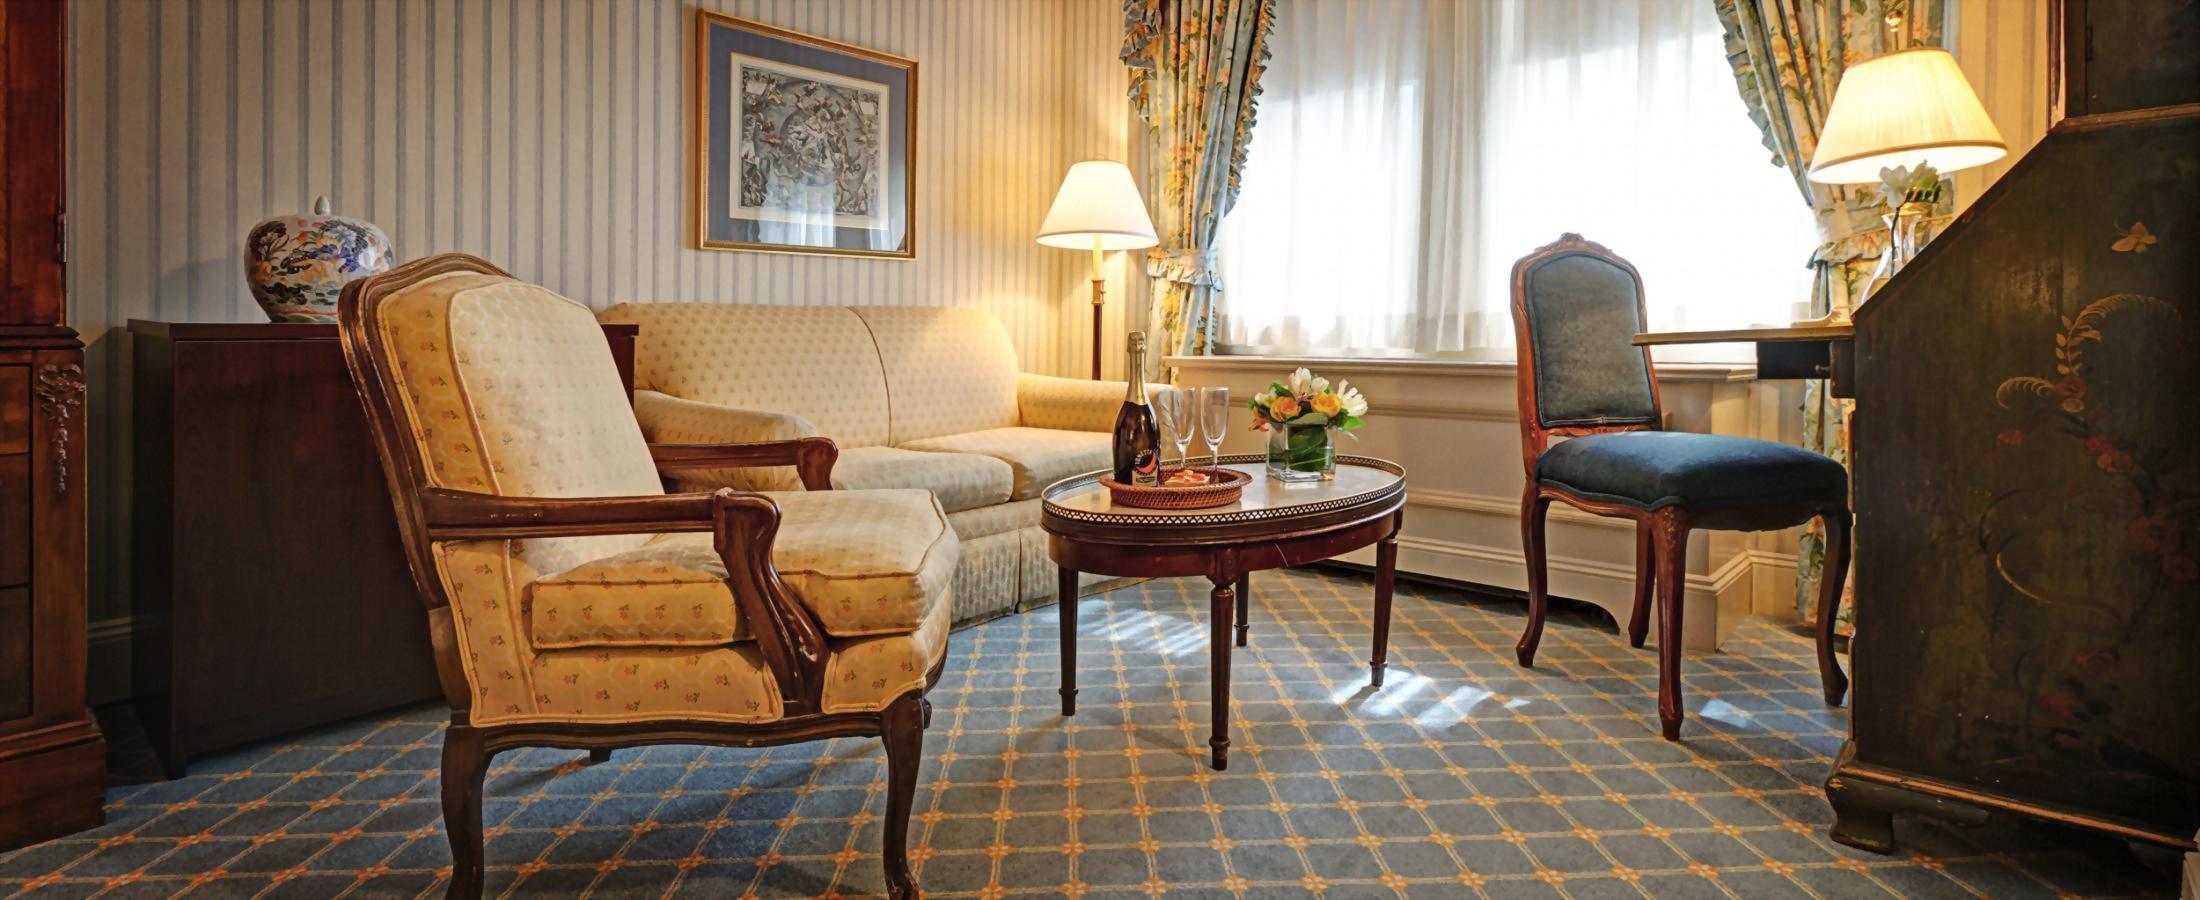 Deluxe Queen Room at the Hotel Elysée with one queen bed and sitting area